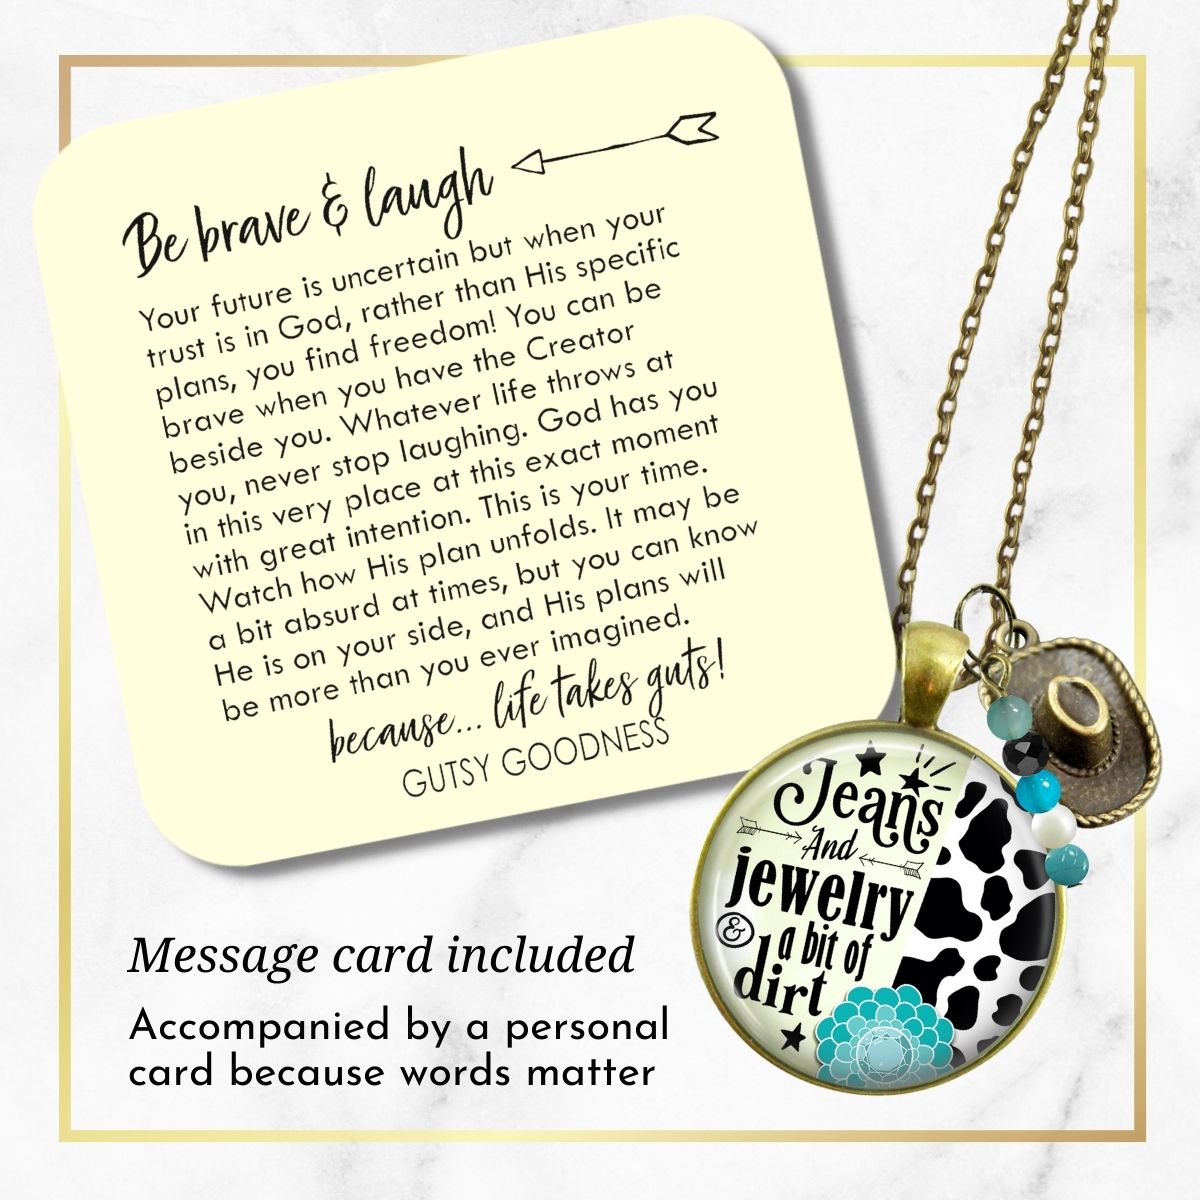 Handmade Gutsy Goodness Jewelry Jeans And Jewelry And A Bit Of Dirt Necklace Western Cowboy Hat Country Girl Pendant & Message Card